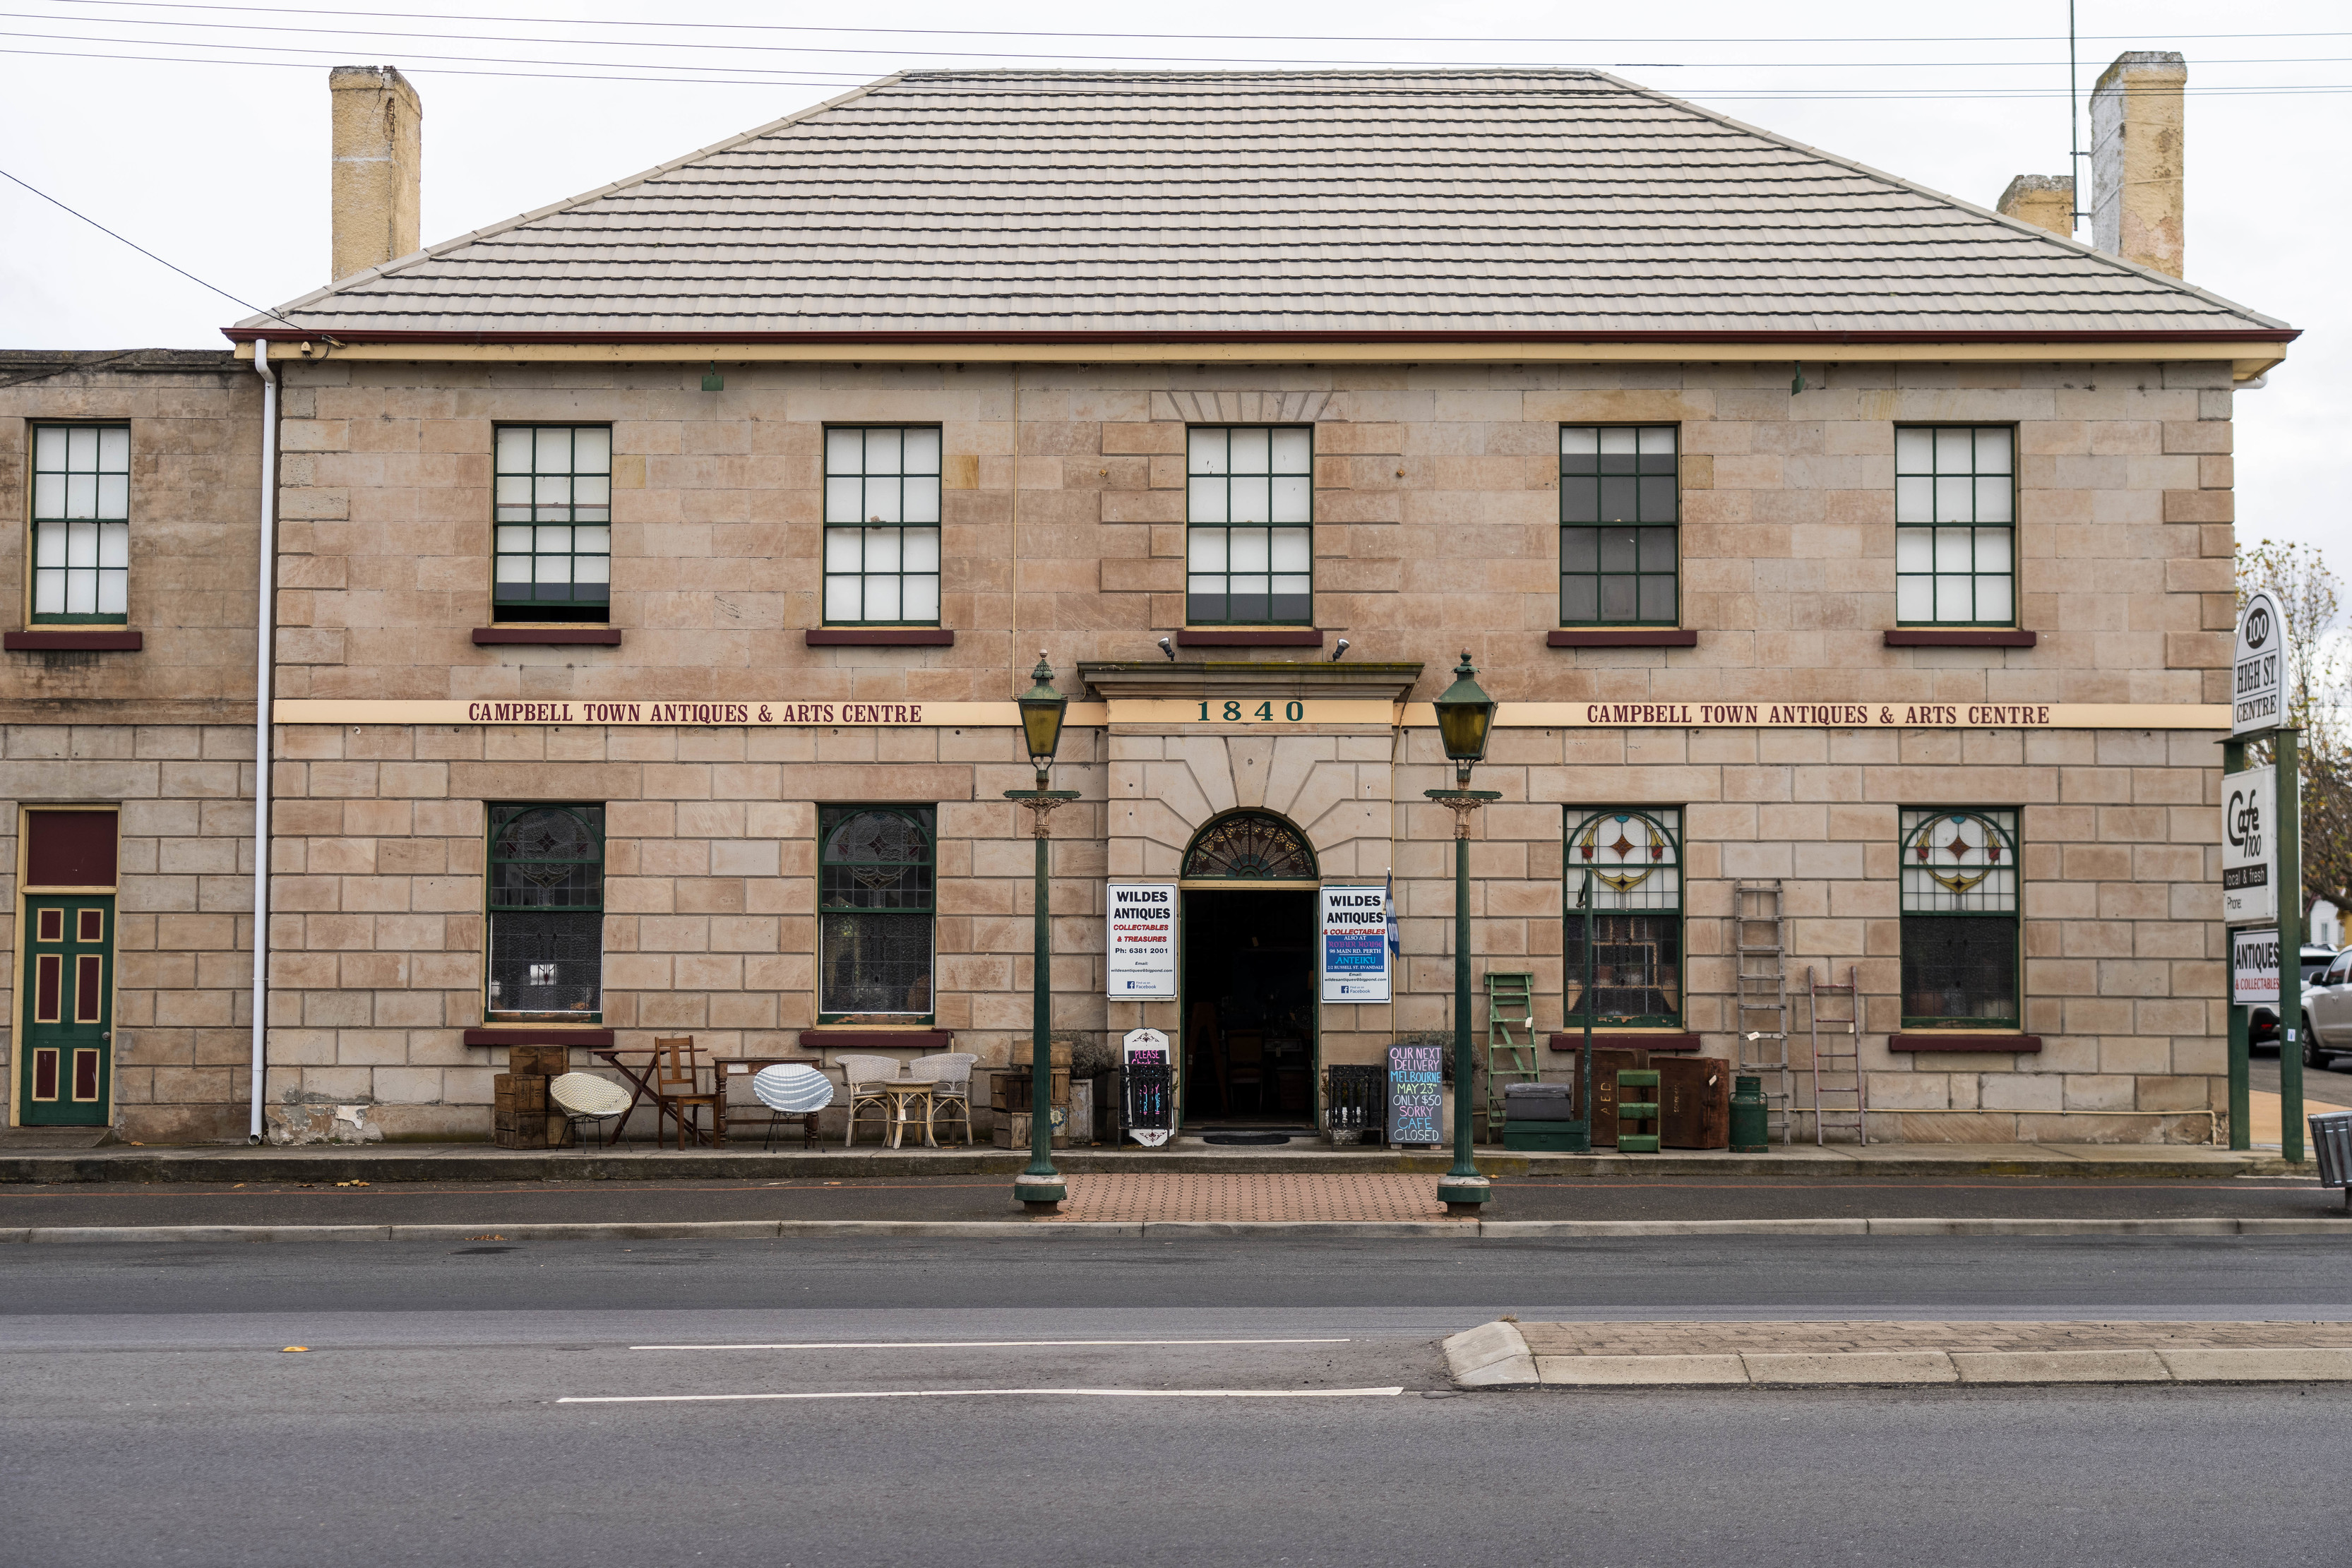 Exterior shot of Campbell Town Antiques & Arts Centre